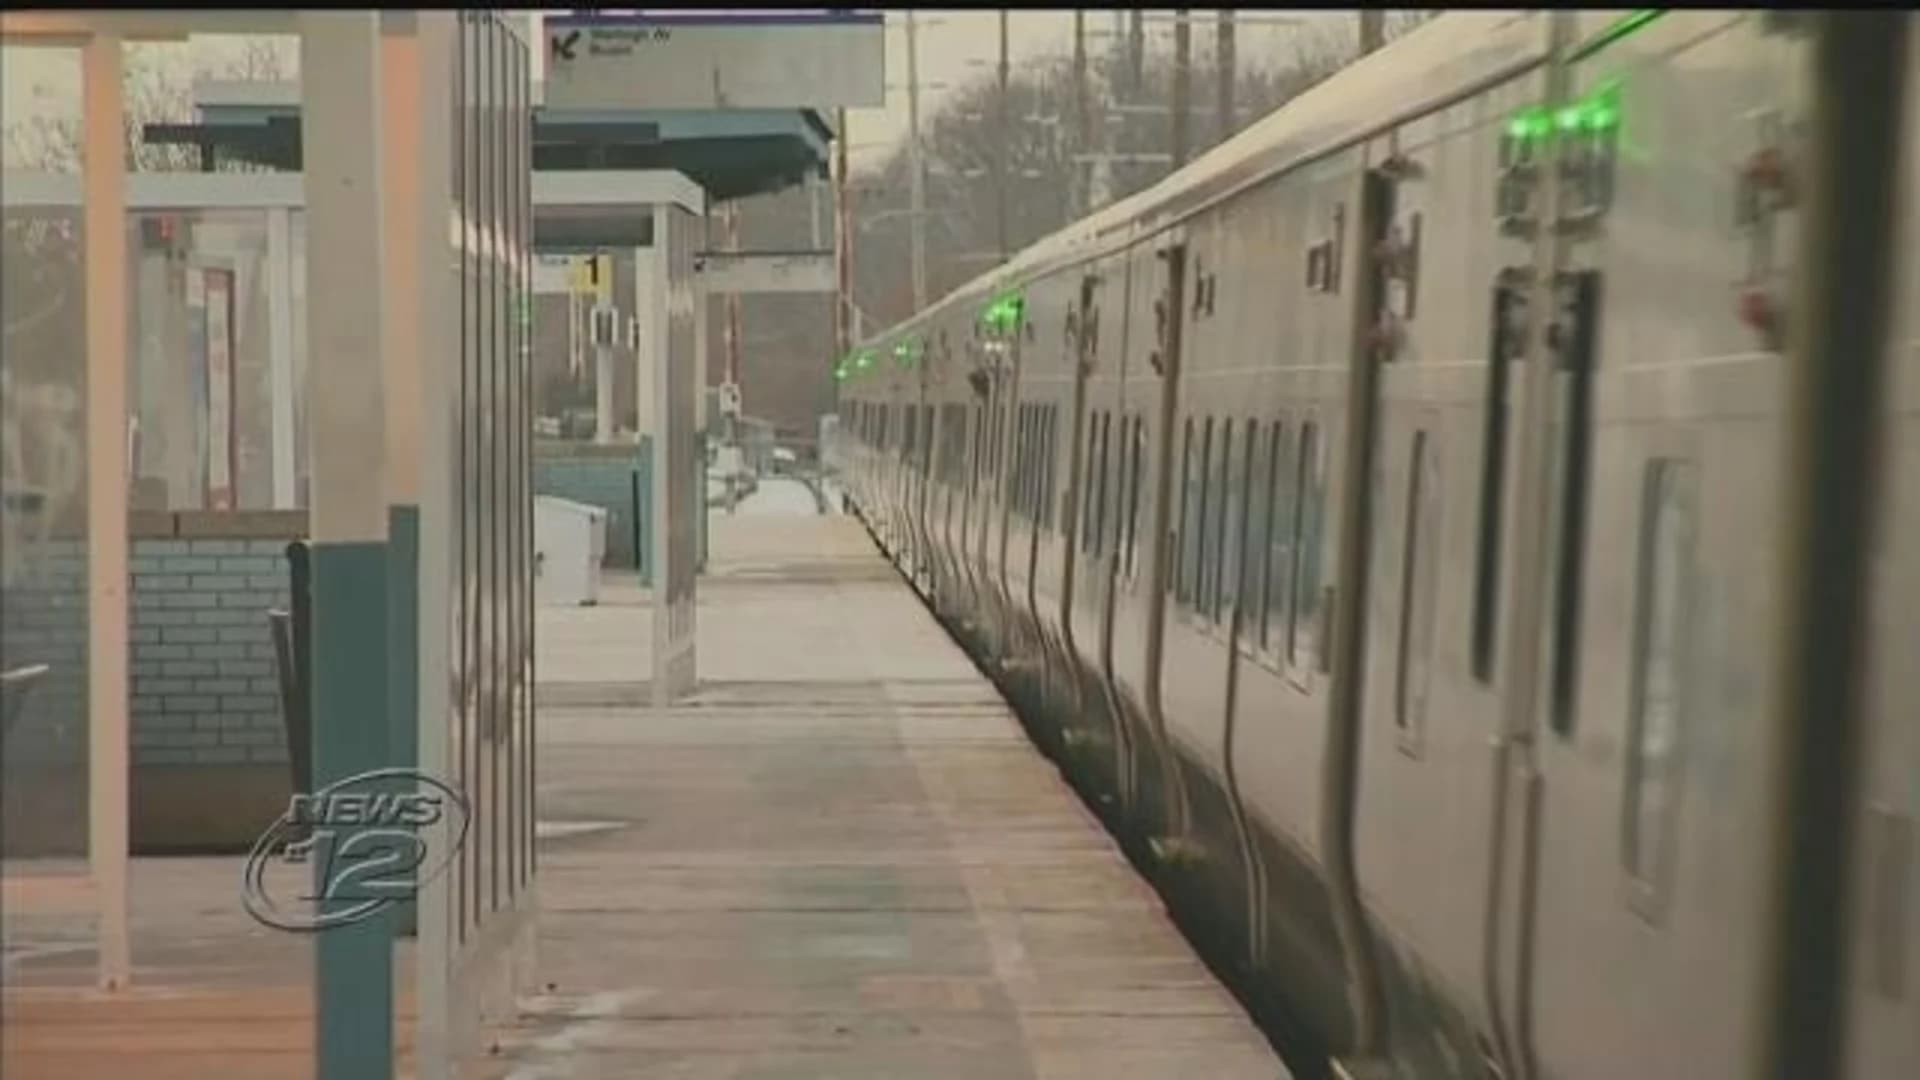 LIRR chief blames Amtrak for spate of service woes